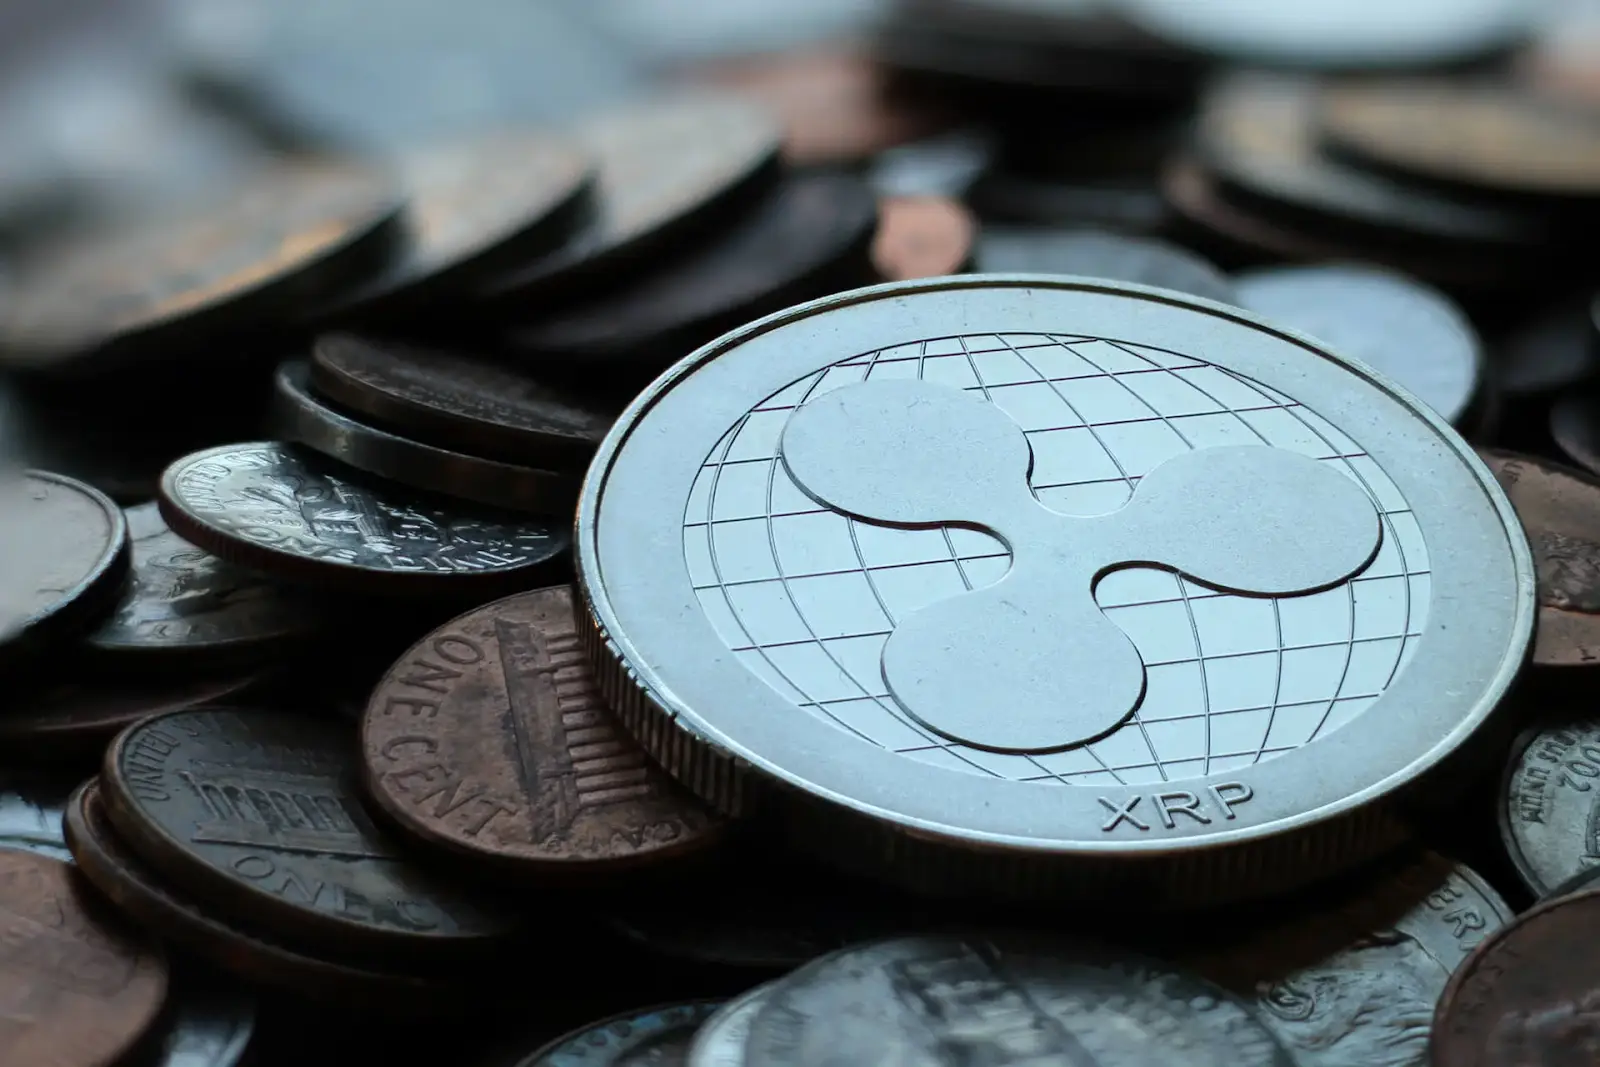 An image of an XRP coin on top of several pennies